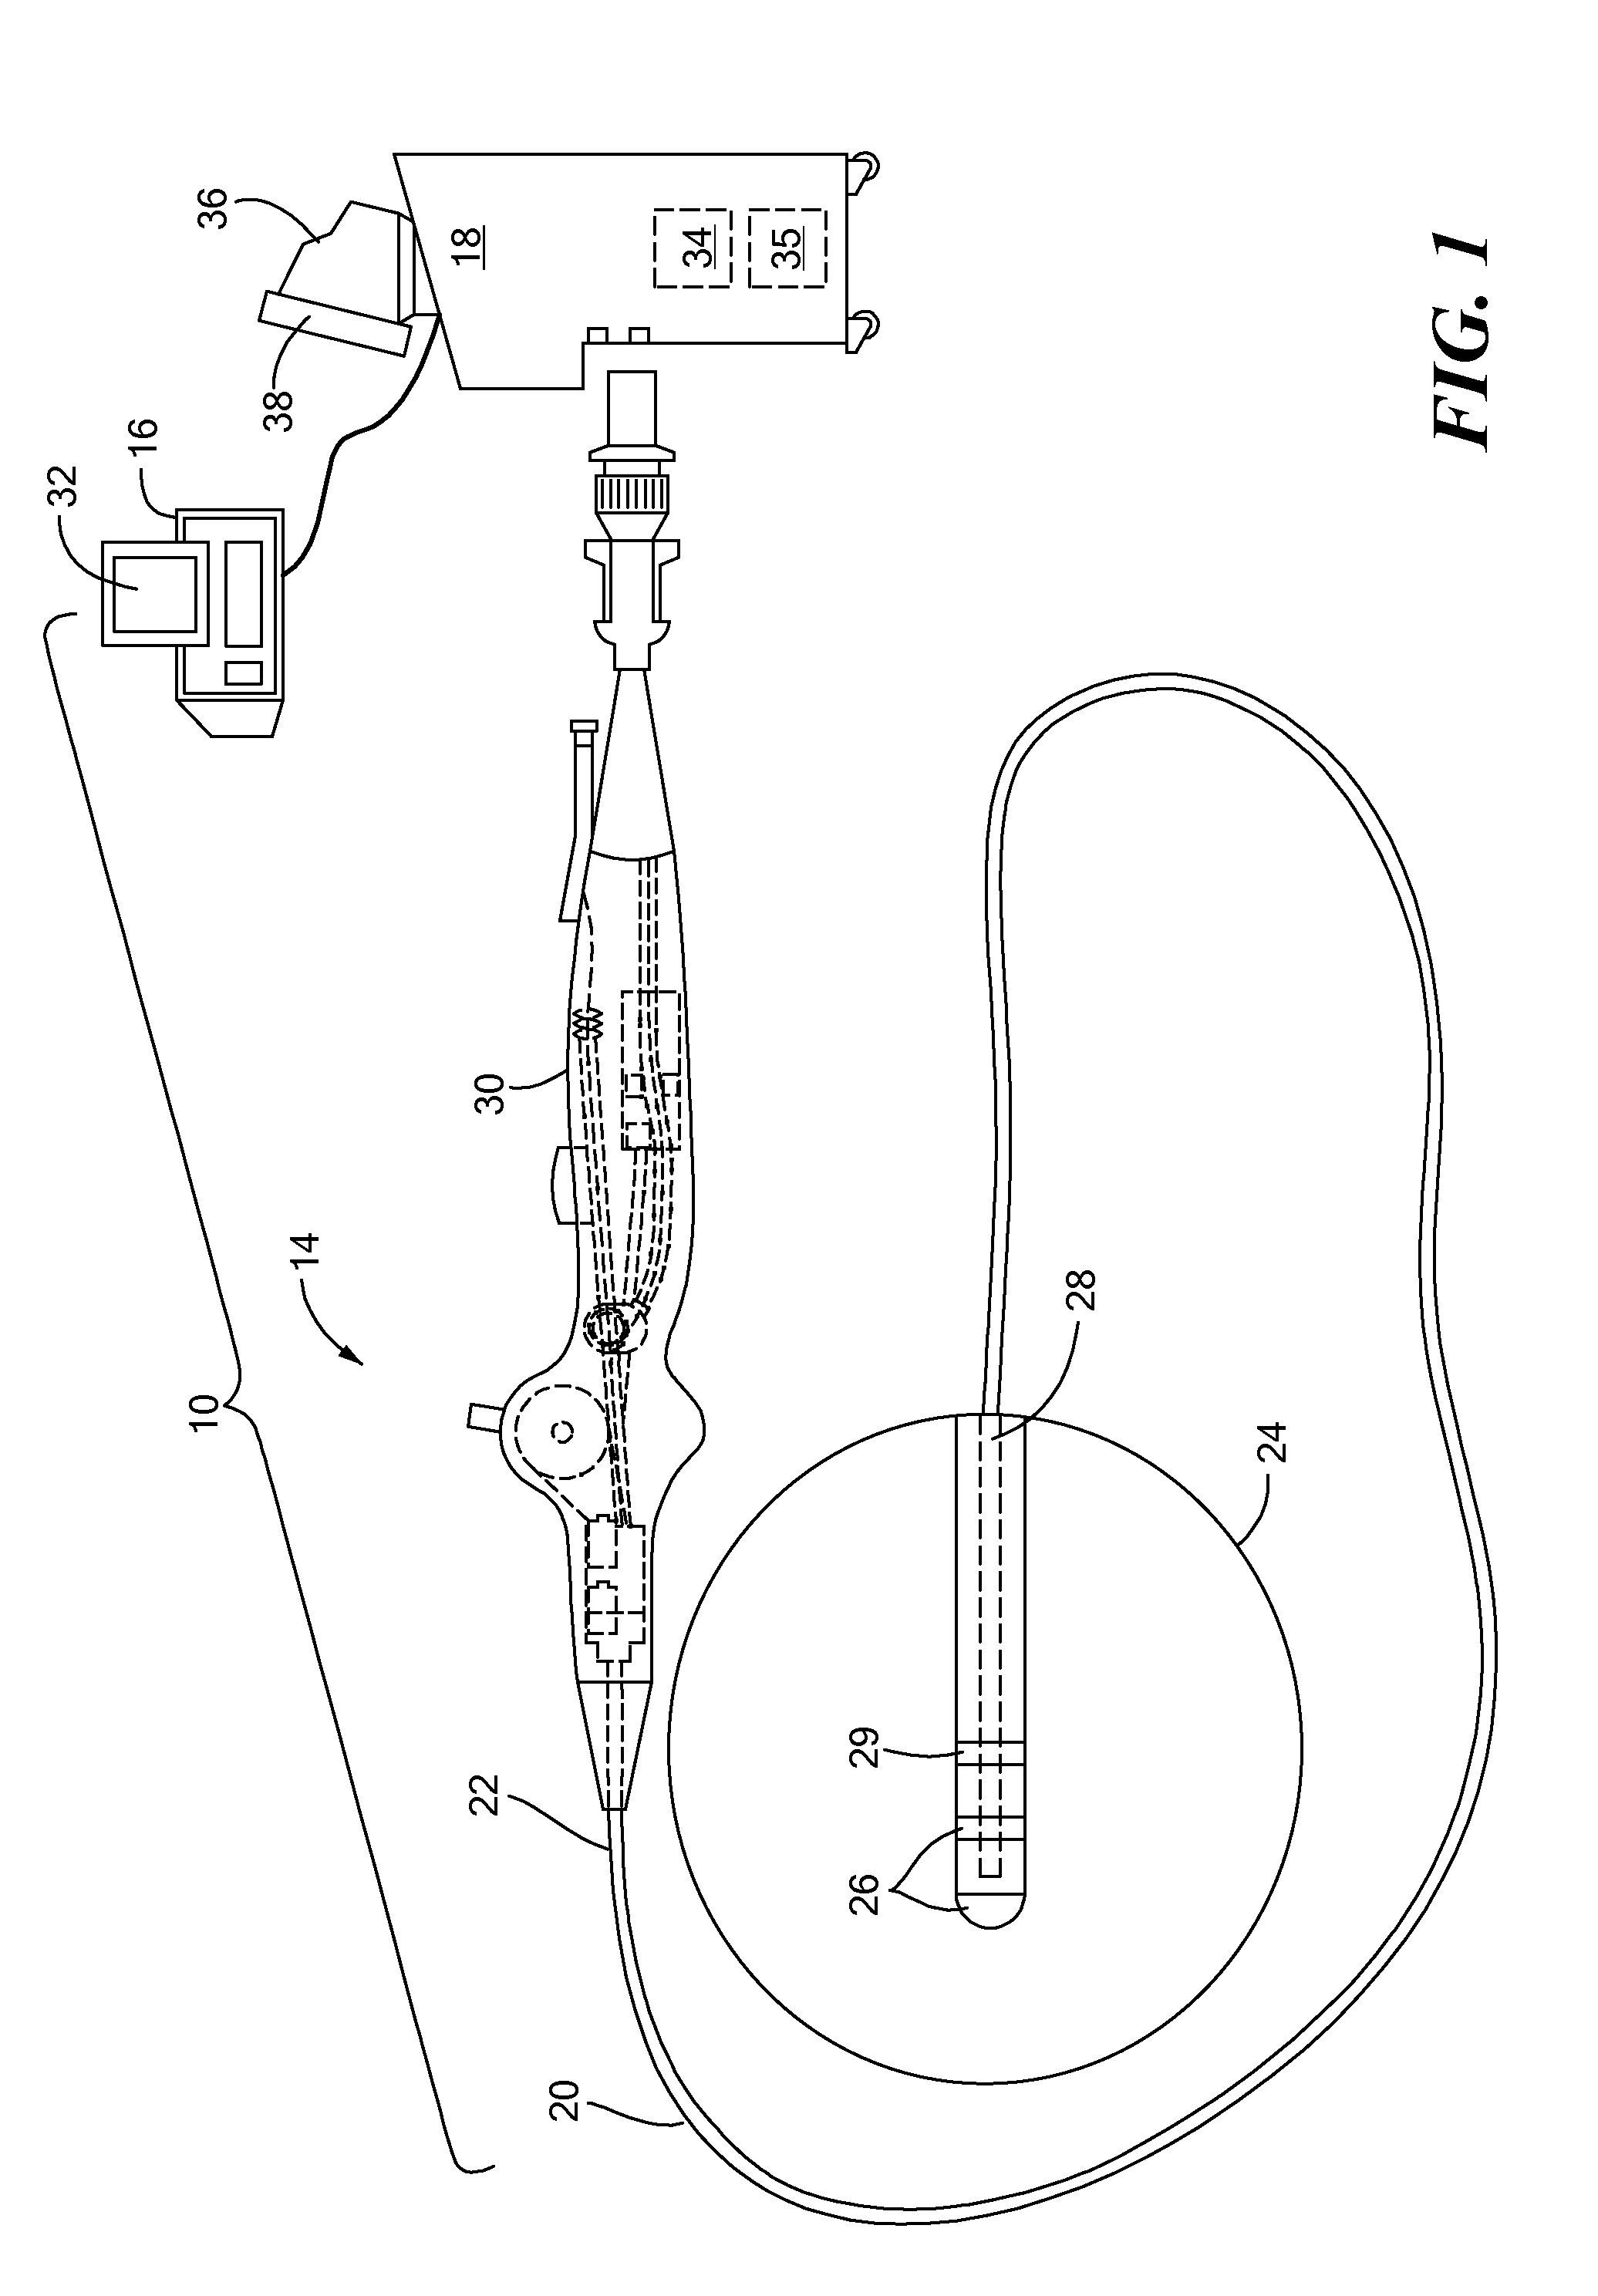 Ablation device and method for electroporating tissue cells